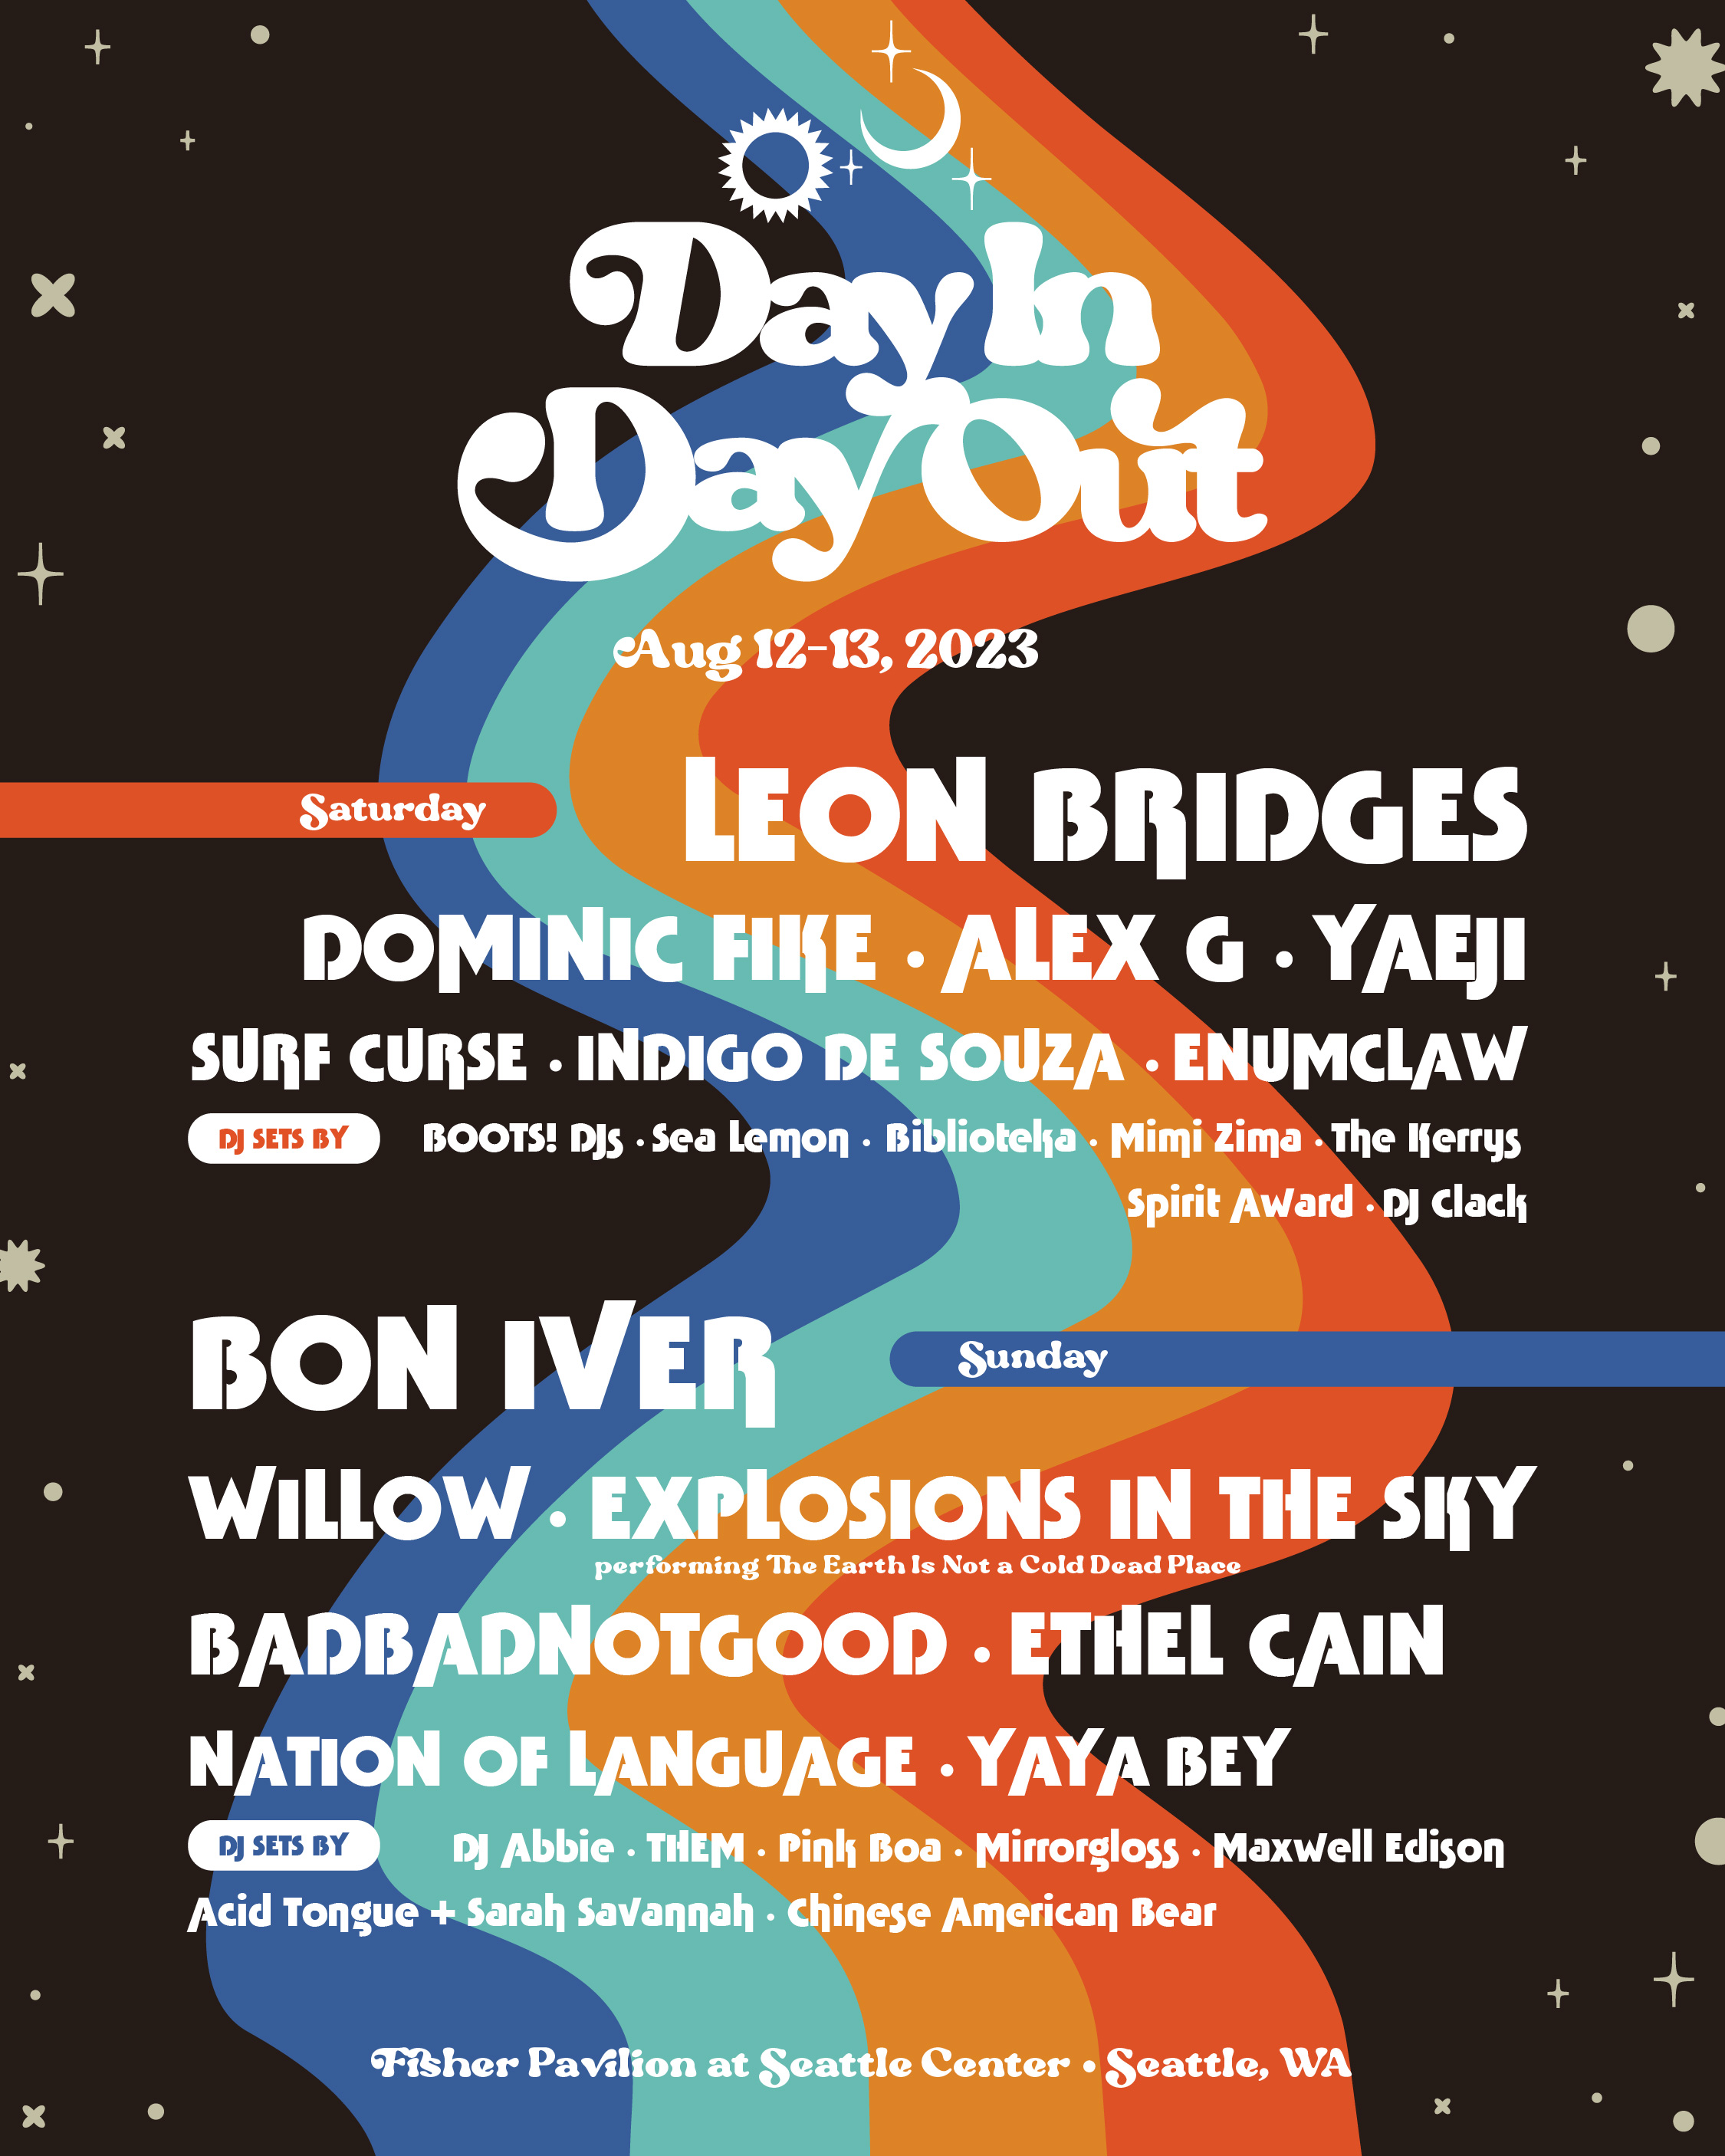 Buy Tickets to Day In Day Out Festival 2023 in Seattle on Aug 12, 2023